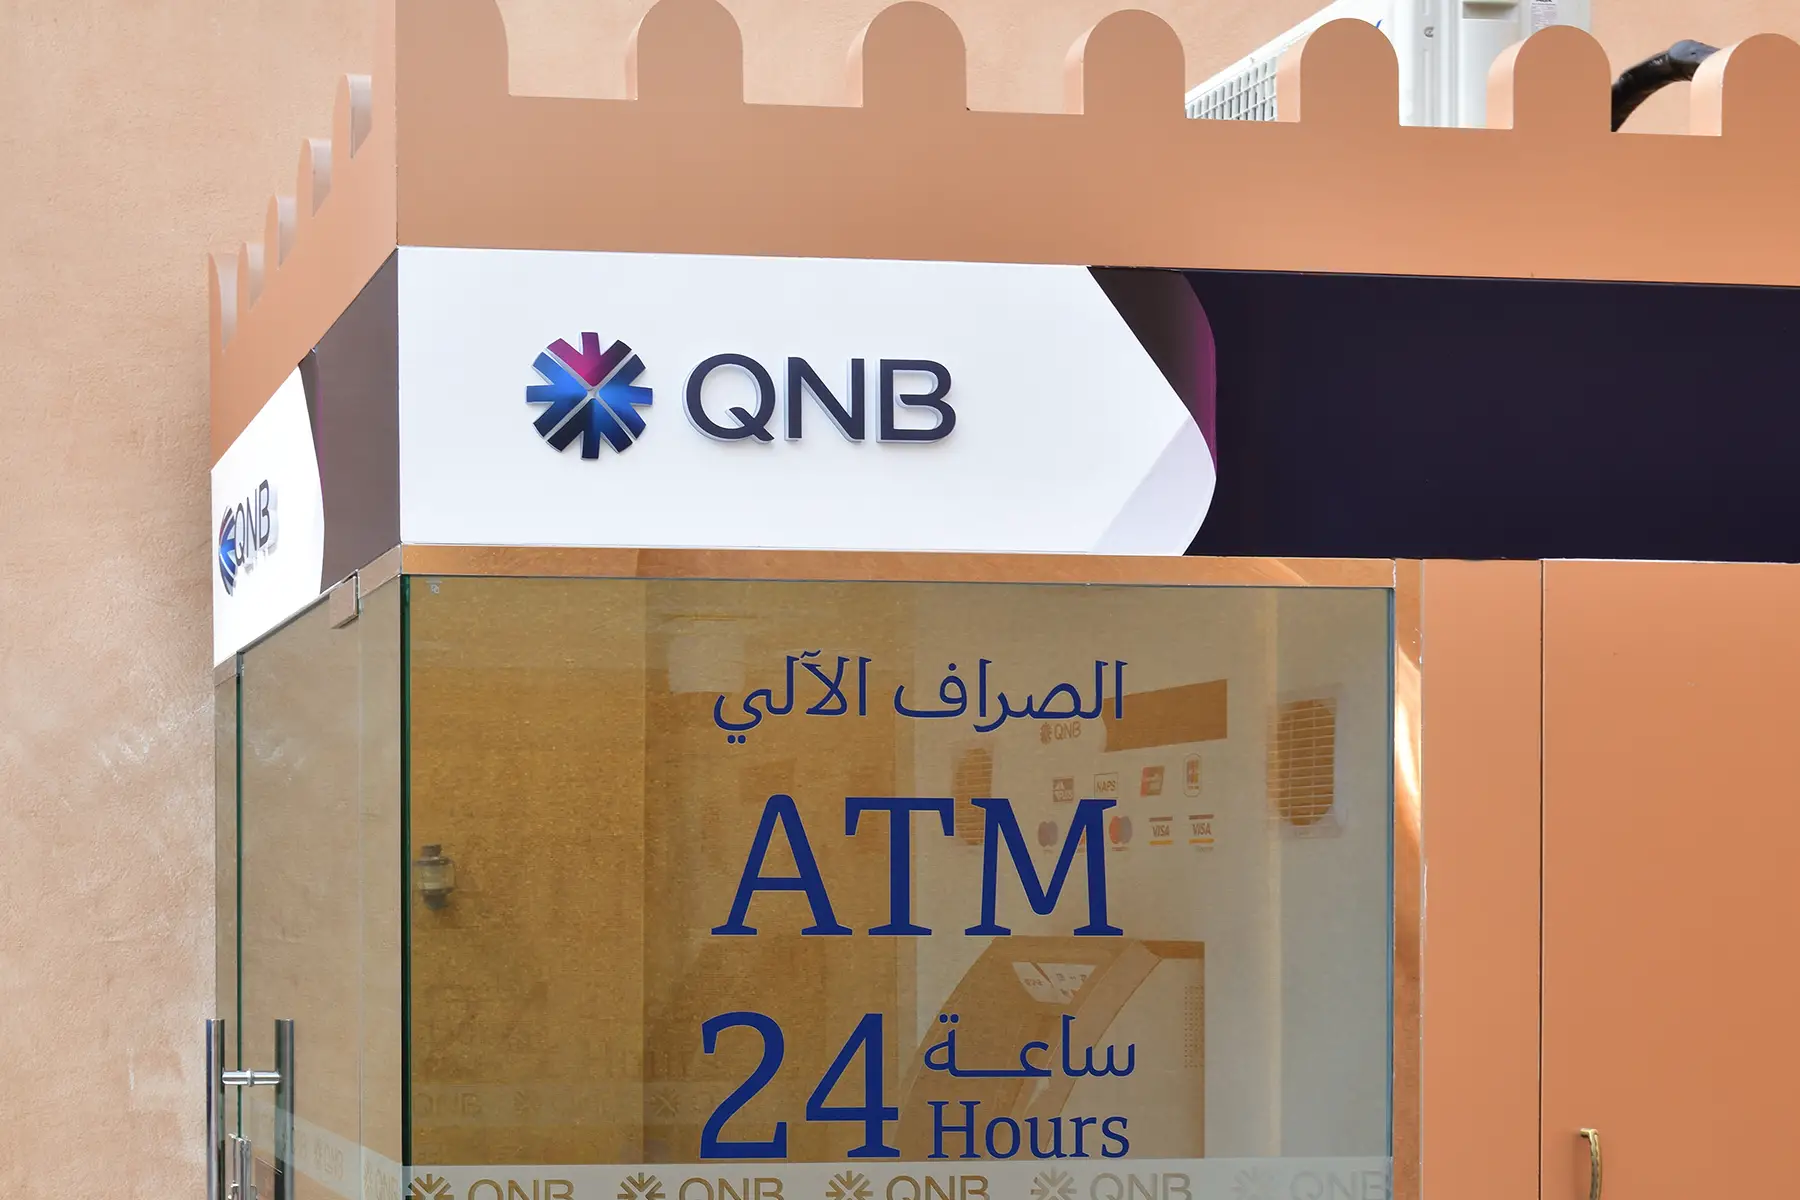 A Qatar National Bank ATM in Doha